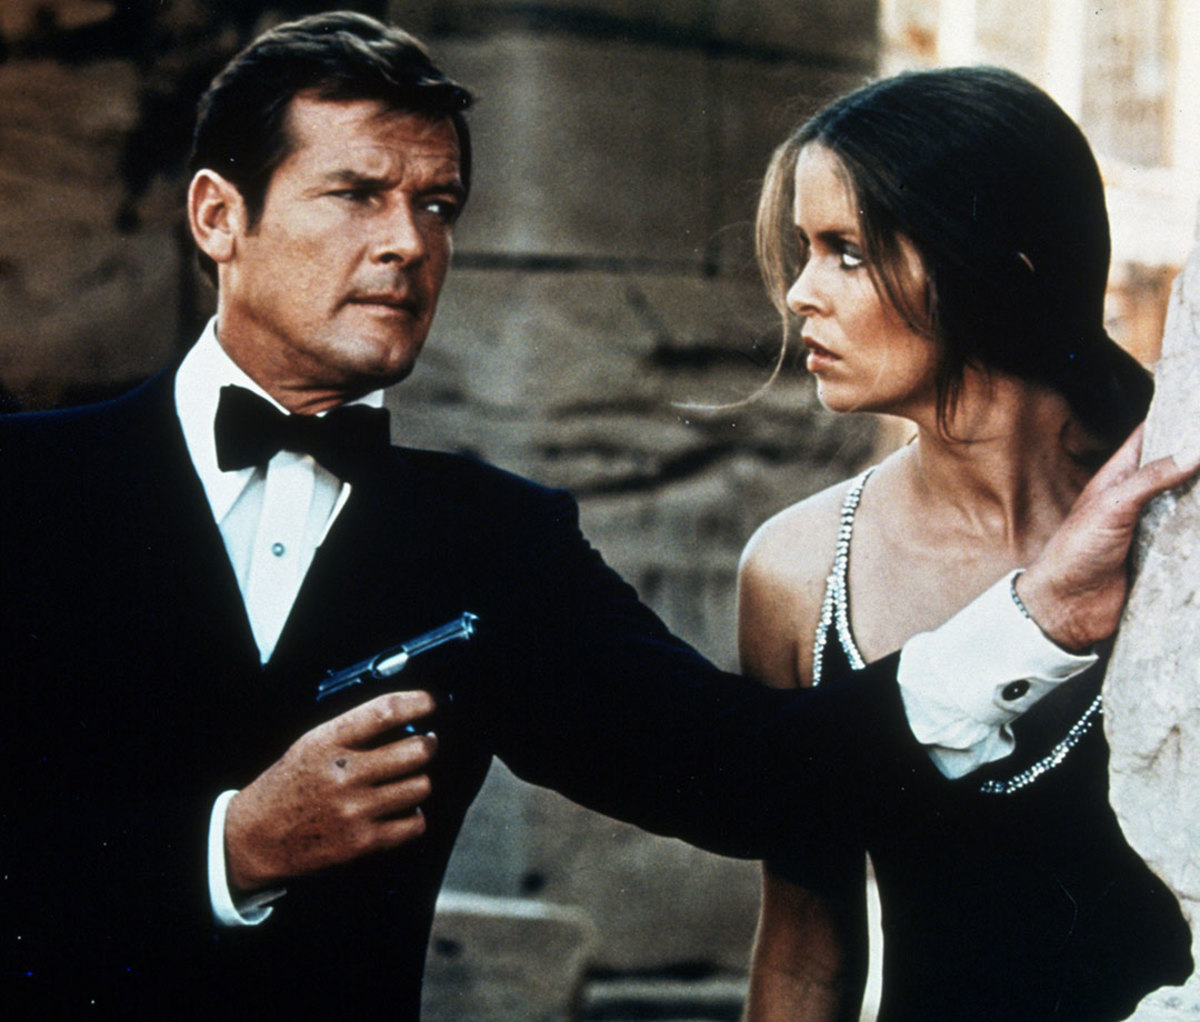 Barbara Bach and Curt Jürgens in 'The Spy Who Loved Me'